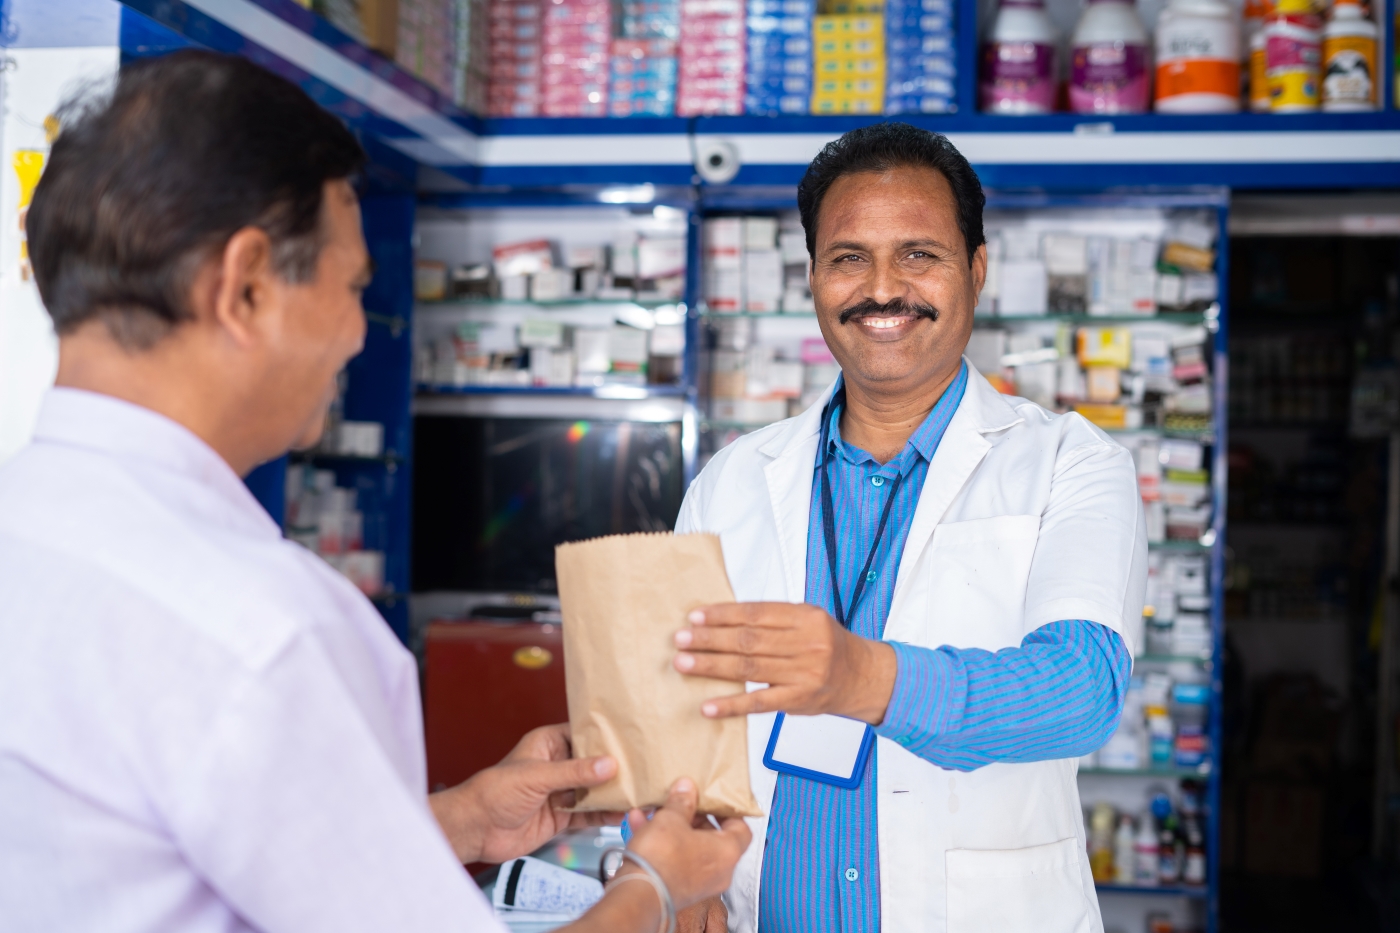 Pharmacist in India handing a bag to a customer